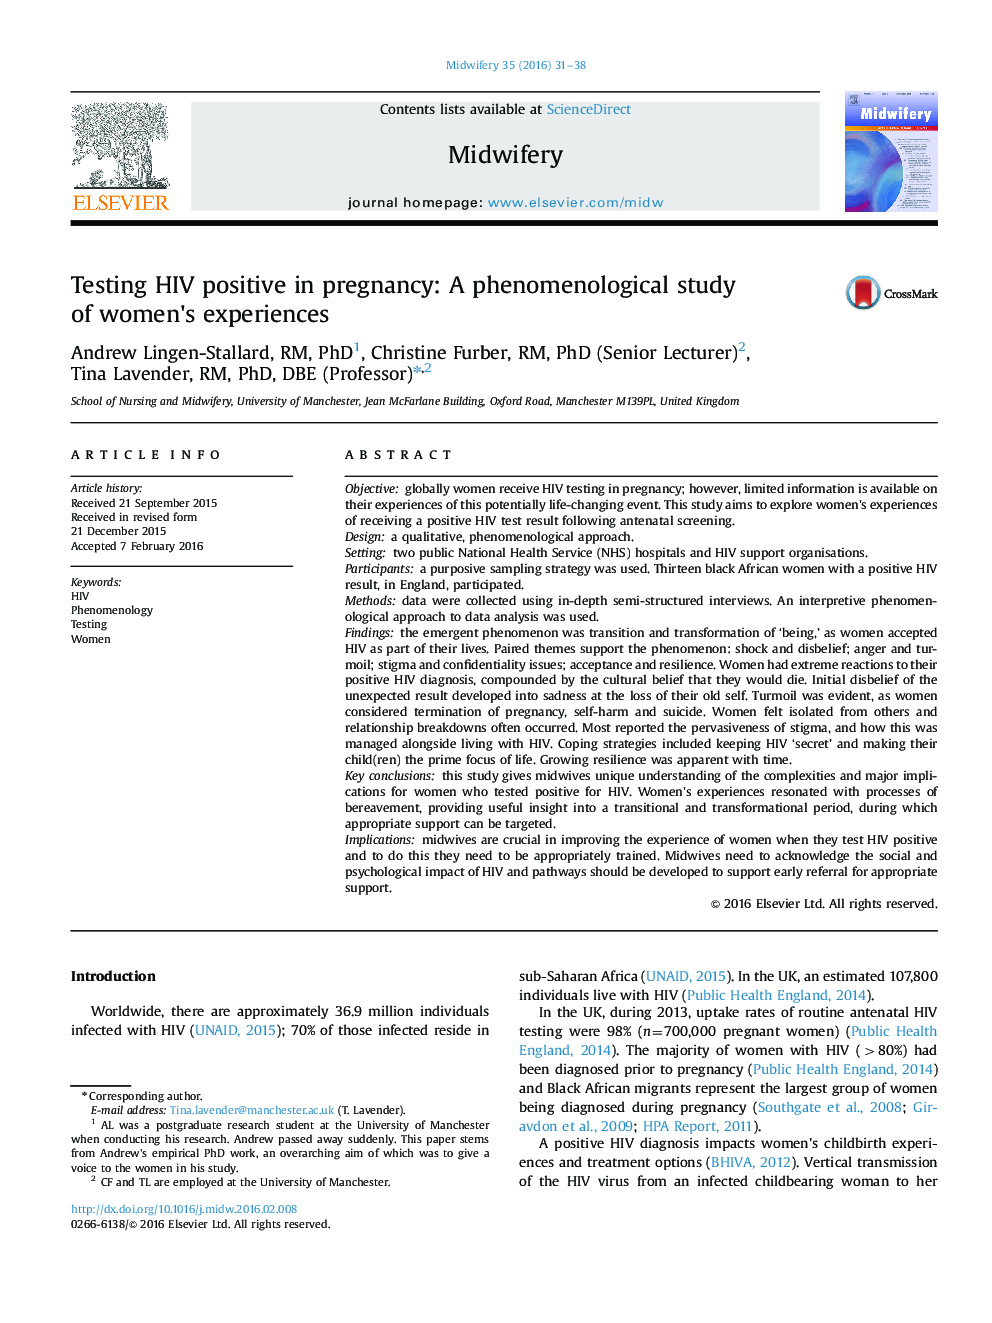 Testing HIV positive in pregnancy: A phenomenological study of women׳s experiences